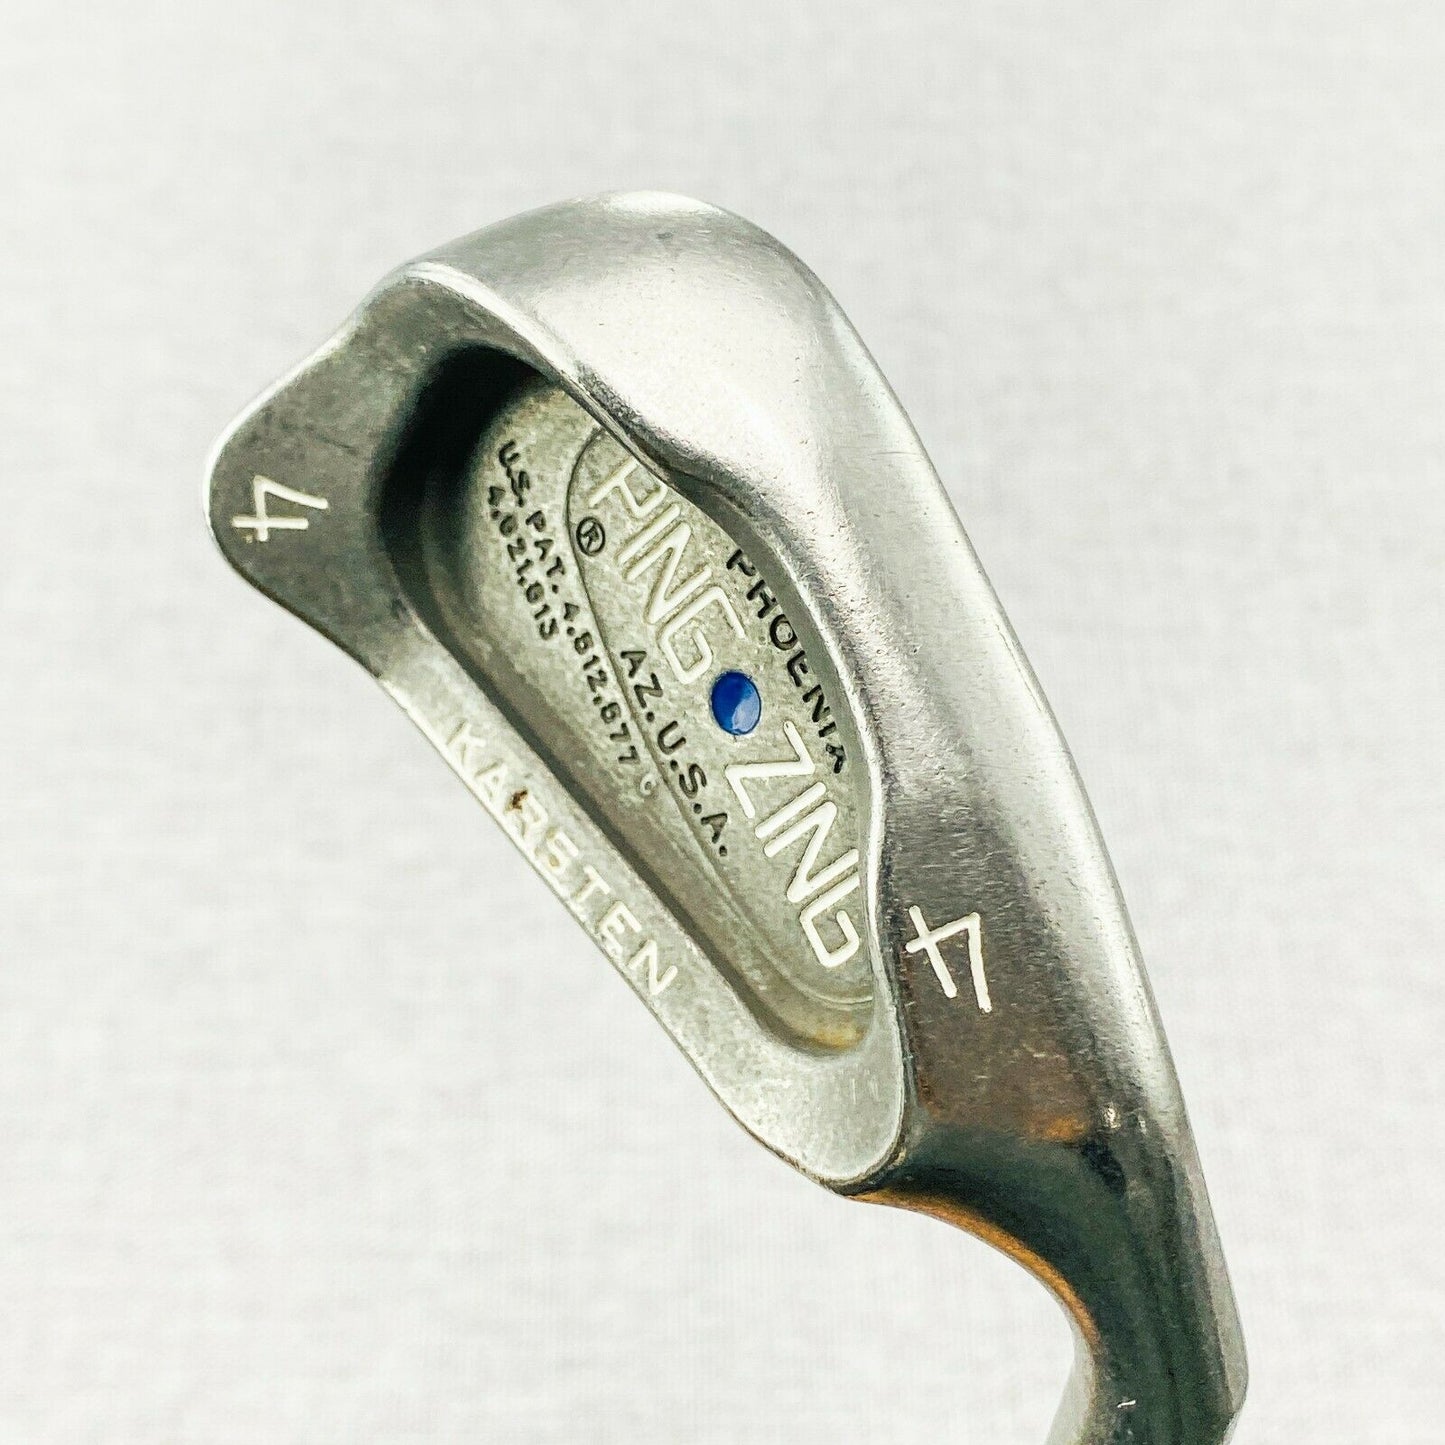 PING Zing Blue-Dot SINGLE Irons. Sold separately! KT-M shaft # 10228